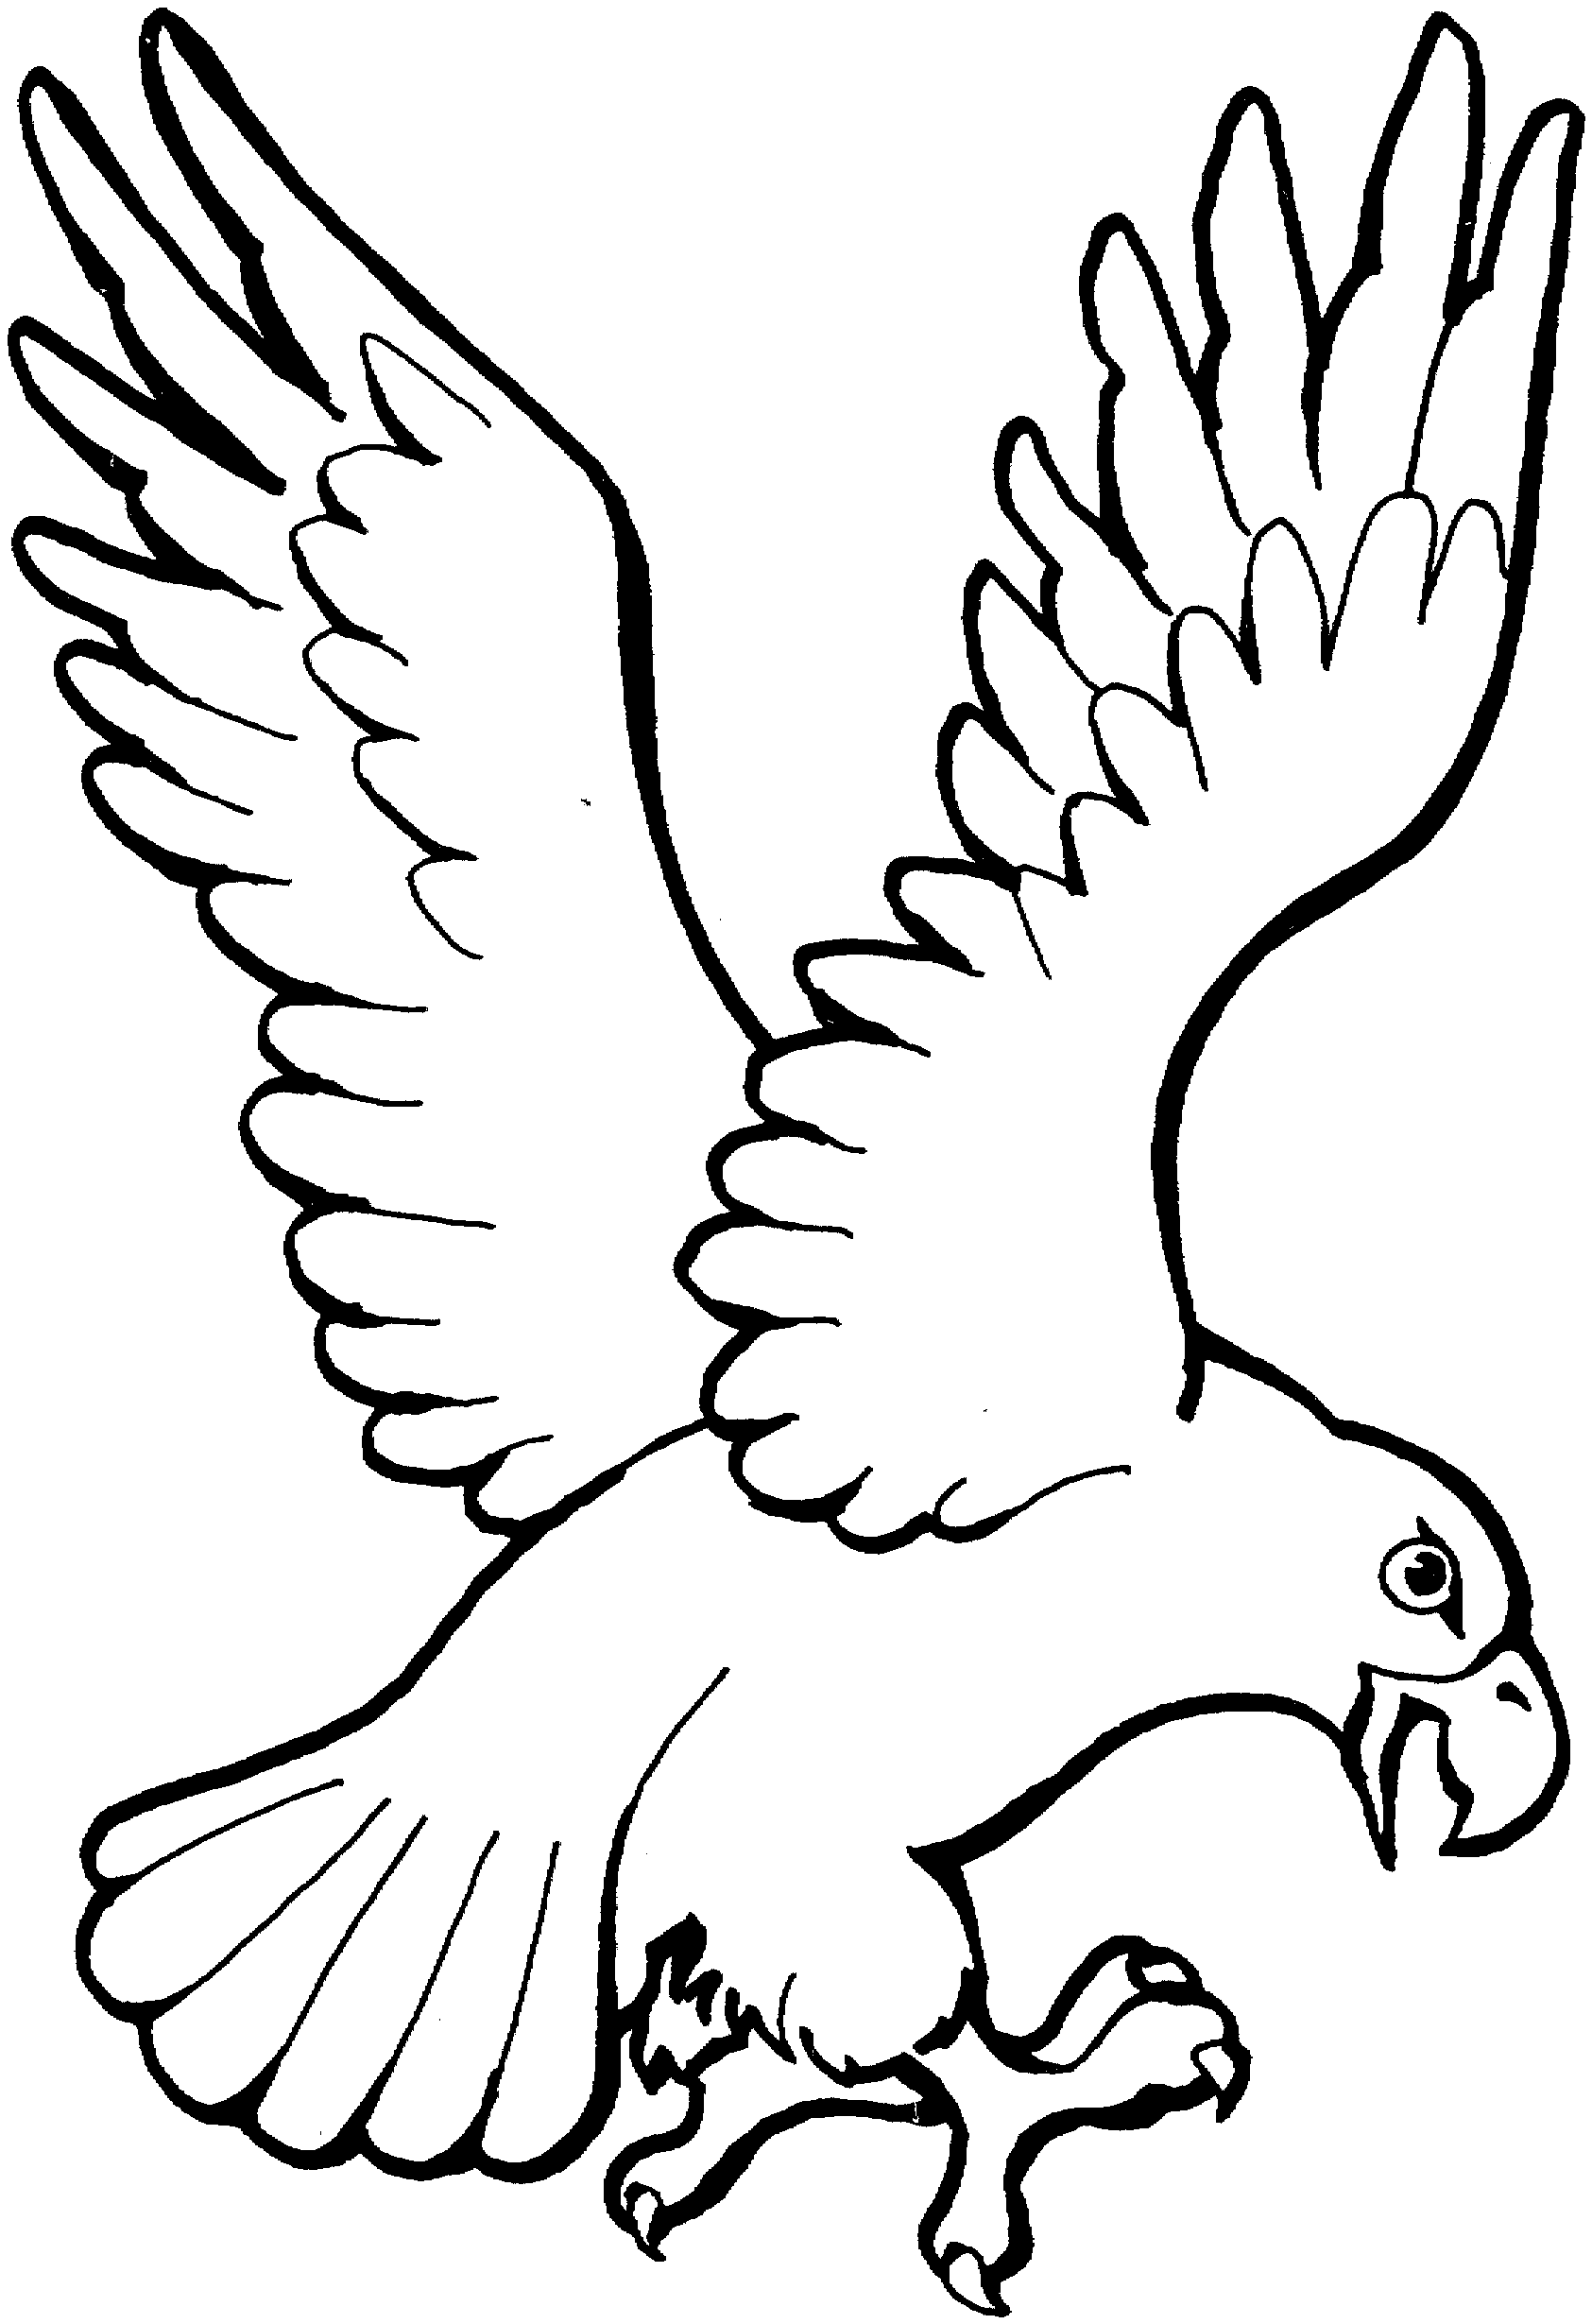 Eagle landing coloring page | Bird coloring pages, Eagle coloring pages ...